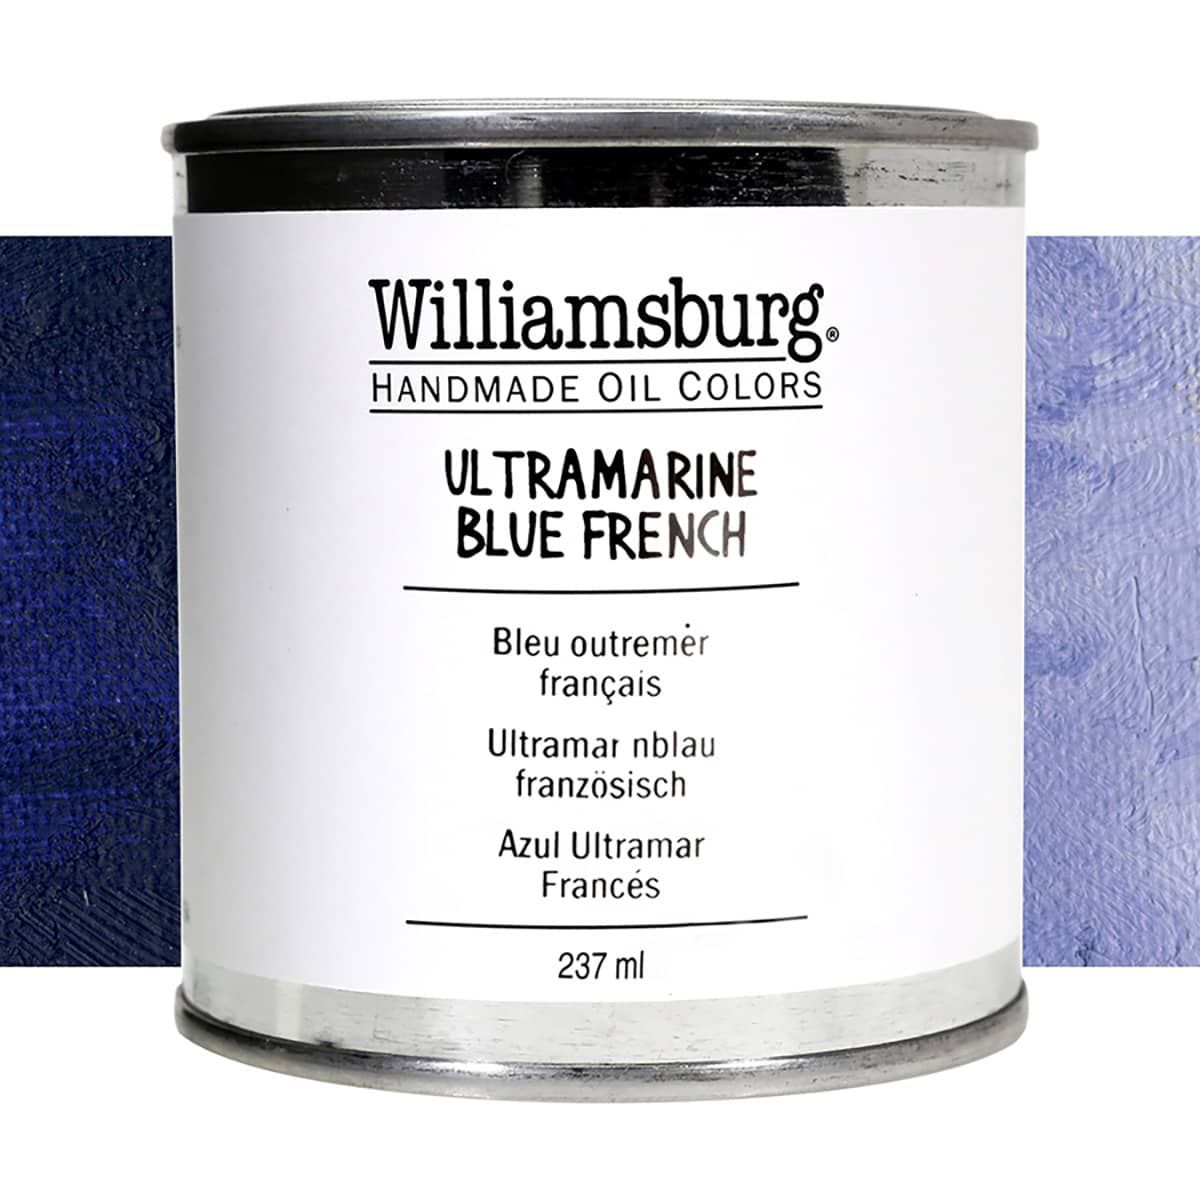 Williamsburg Oil Color 237 ml Can Ultramarine Blue French